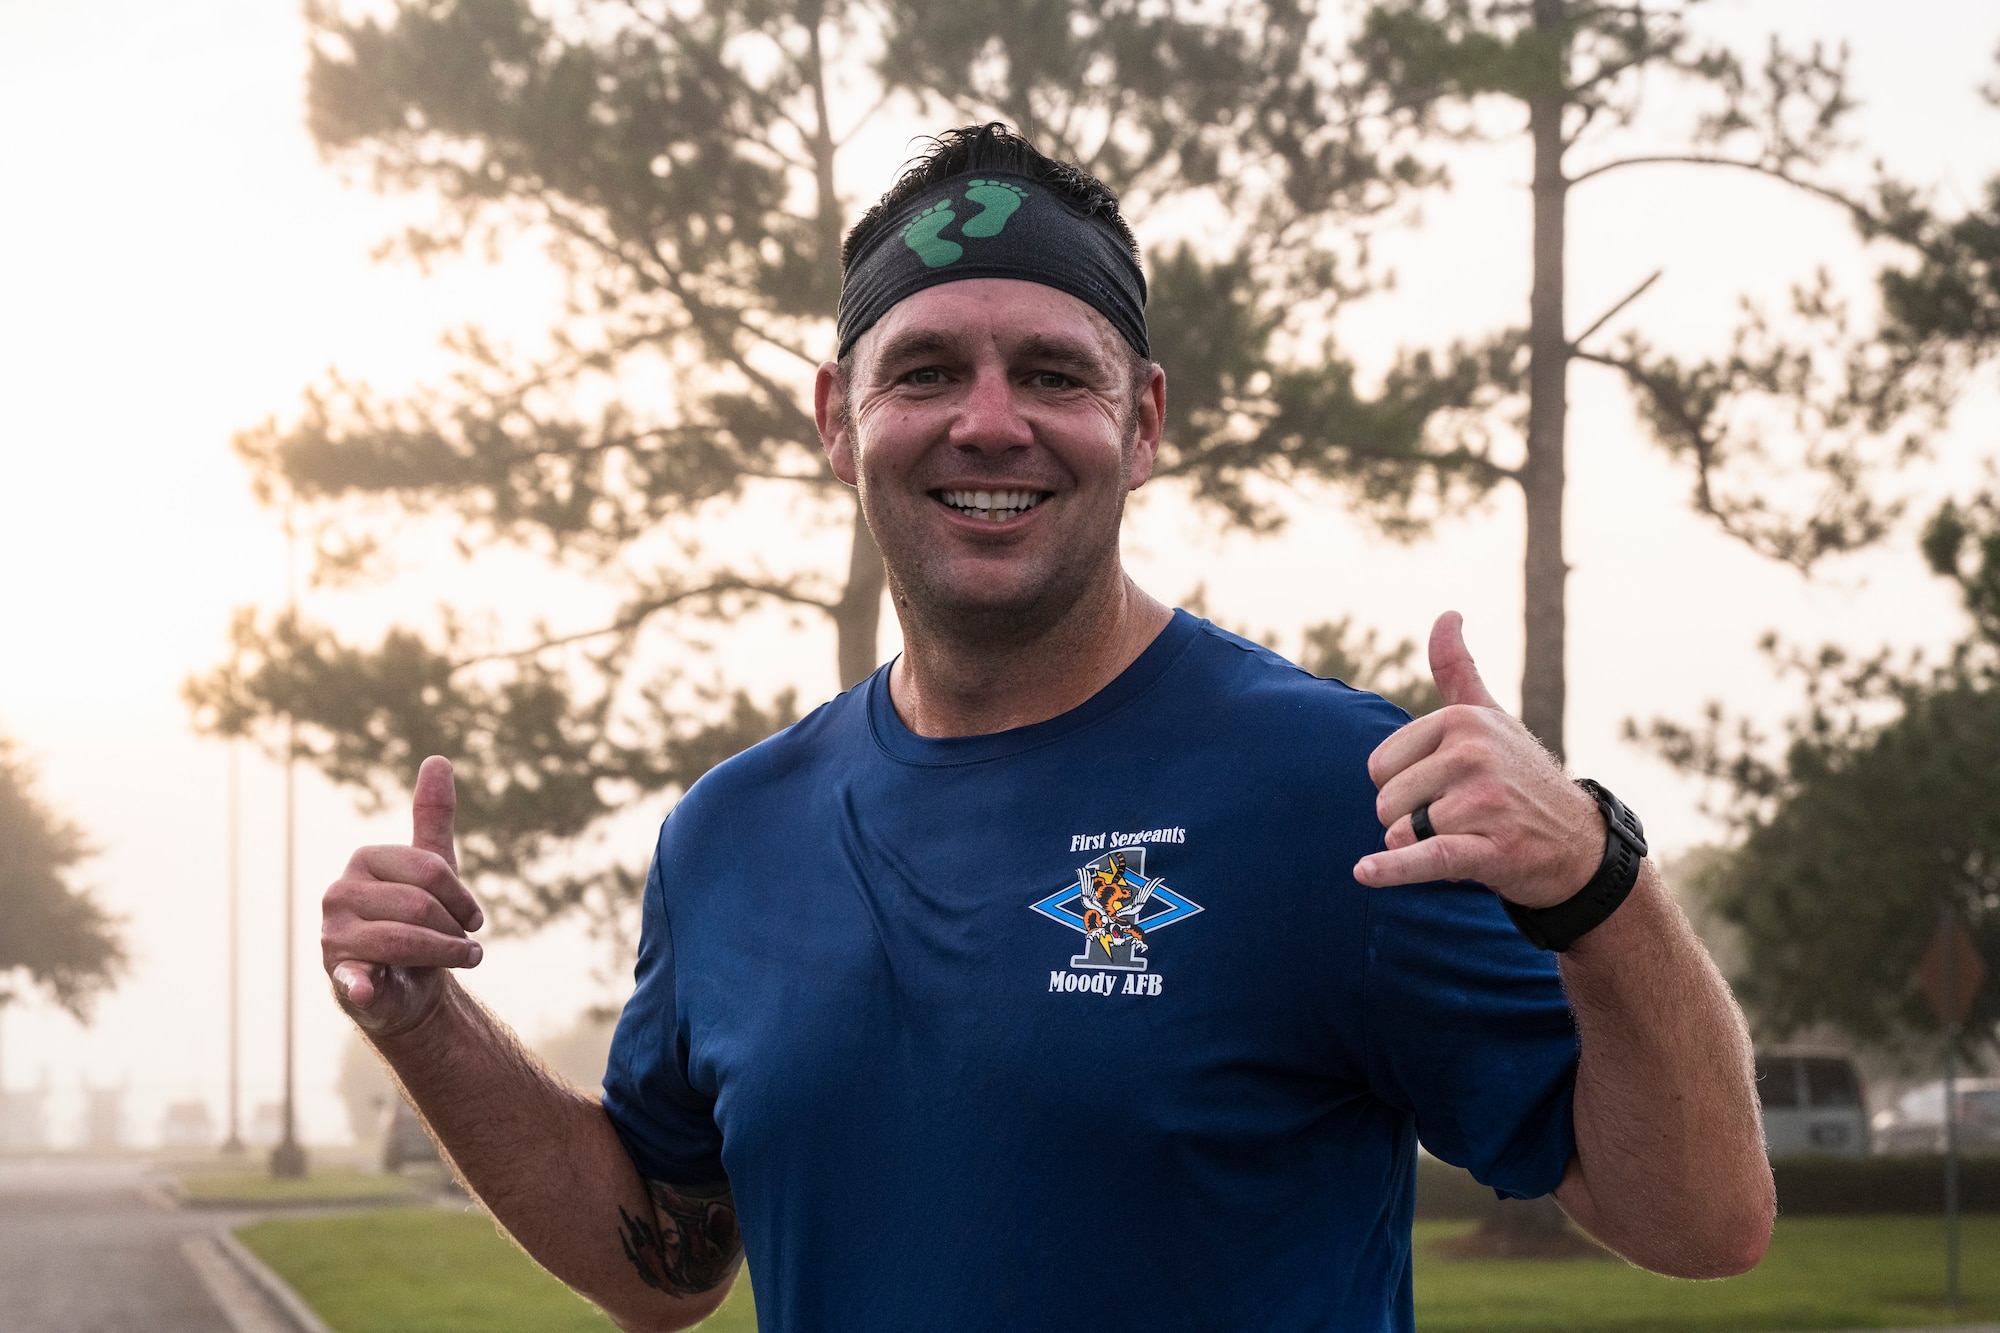 Airman poses for a photo after participating in a 9/11 remembrance run.